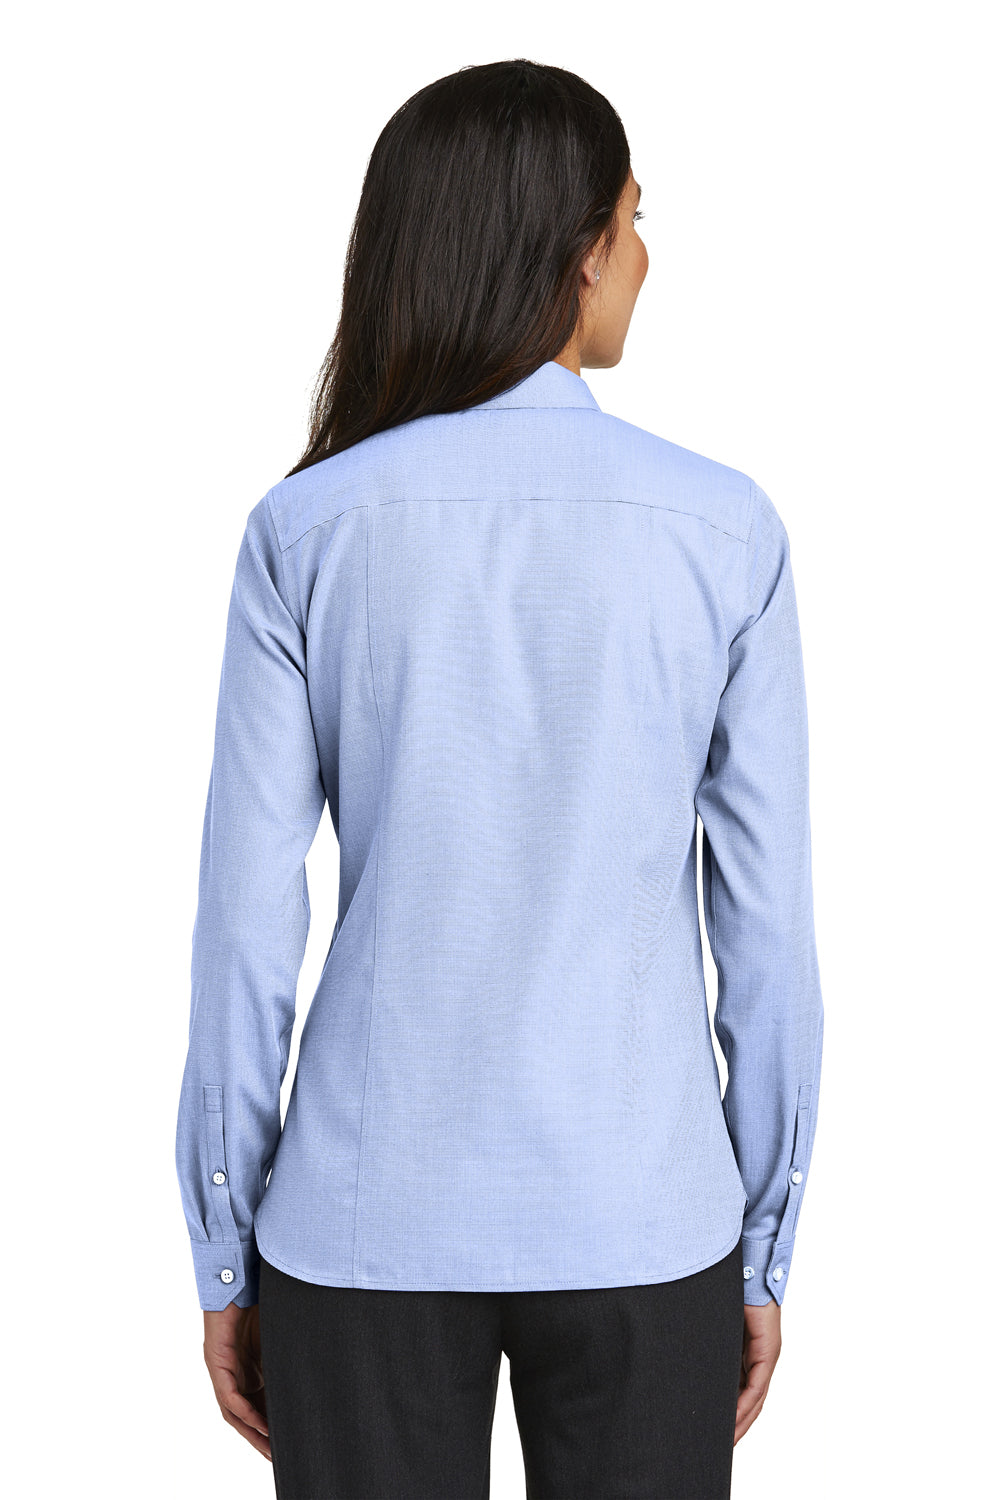 Red House RH470 Womens Nailhead Wrinkle Resistant Long Sleeve Button Down Shirt Pearl Blue Back